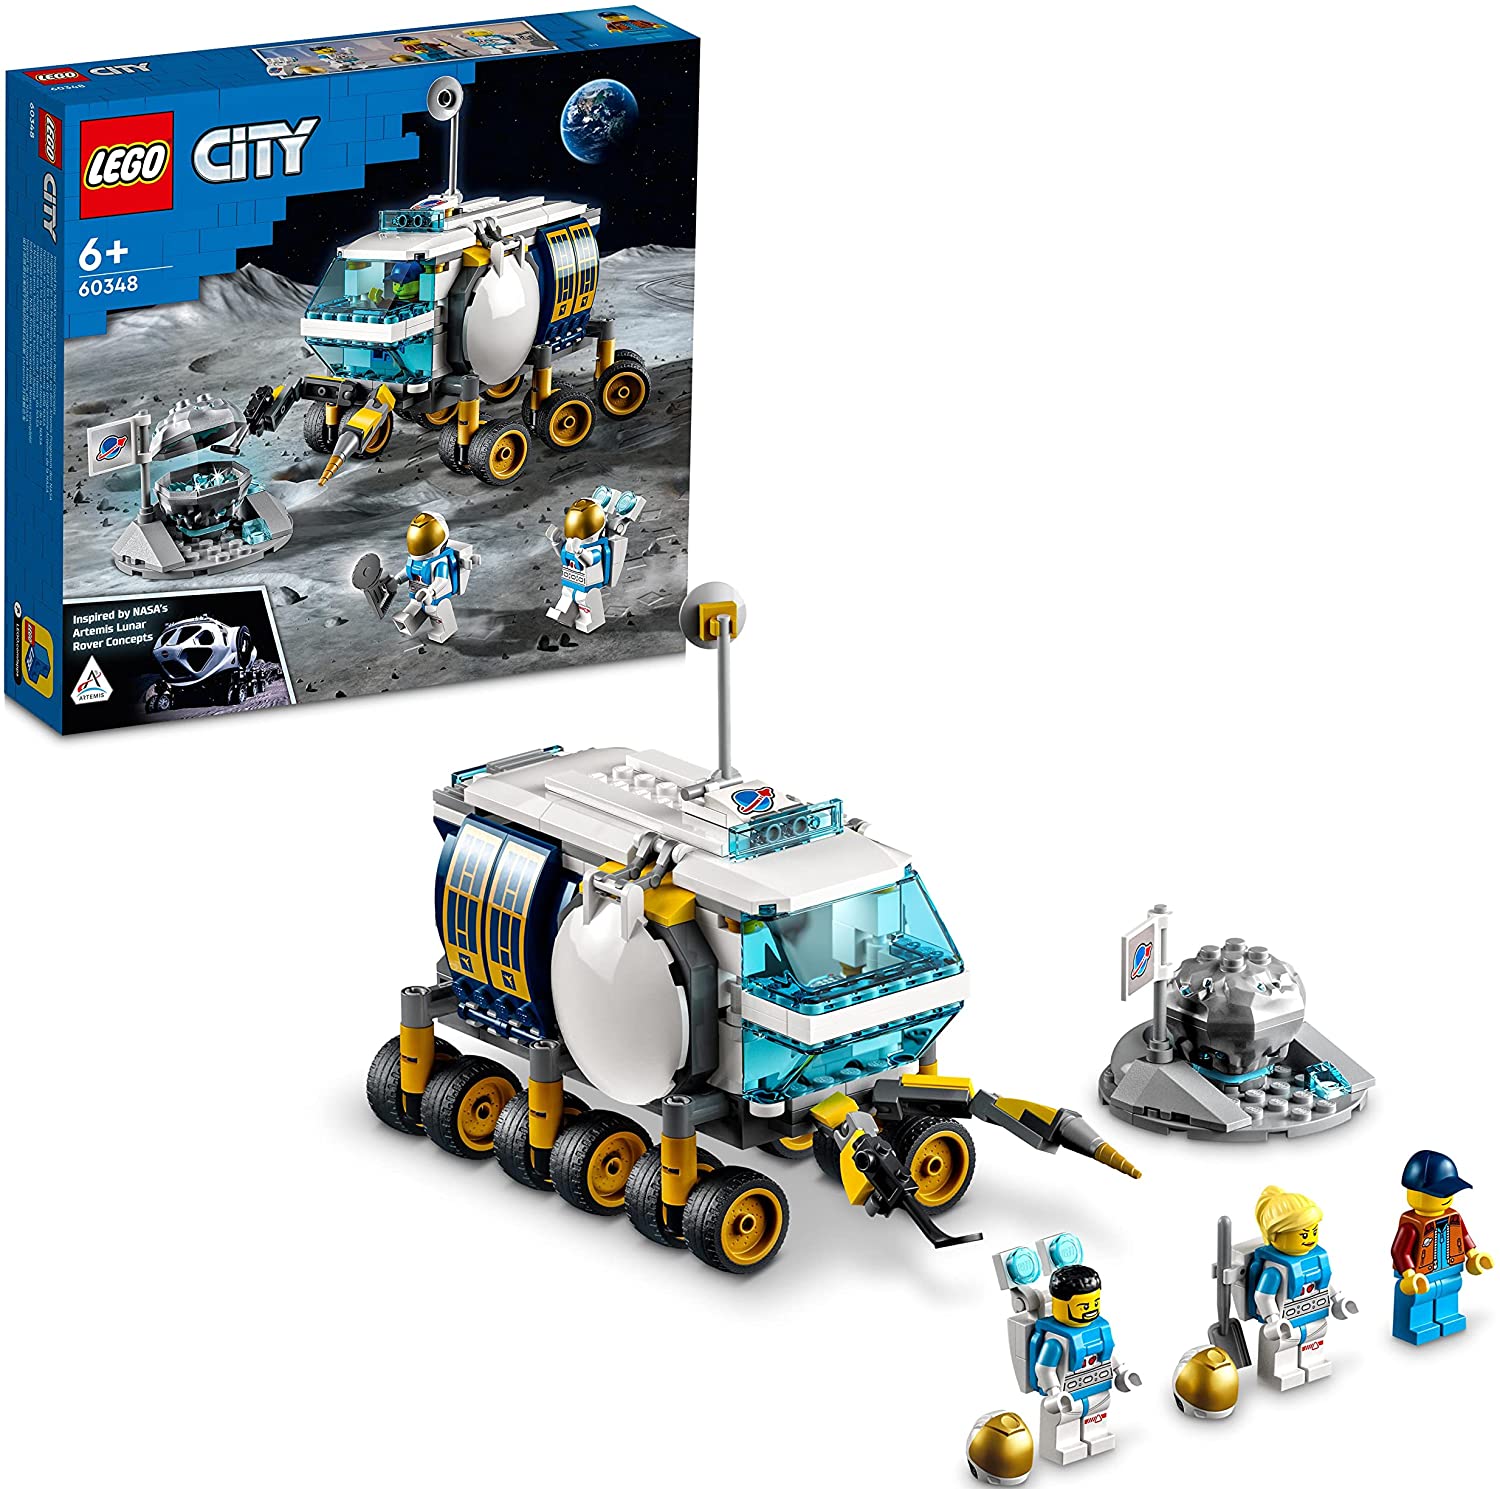 LEGO 60348 City Moon Rover Space Toy with Astronaut Mini Figures from the L